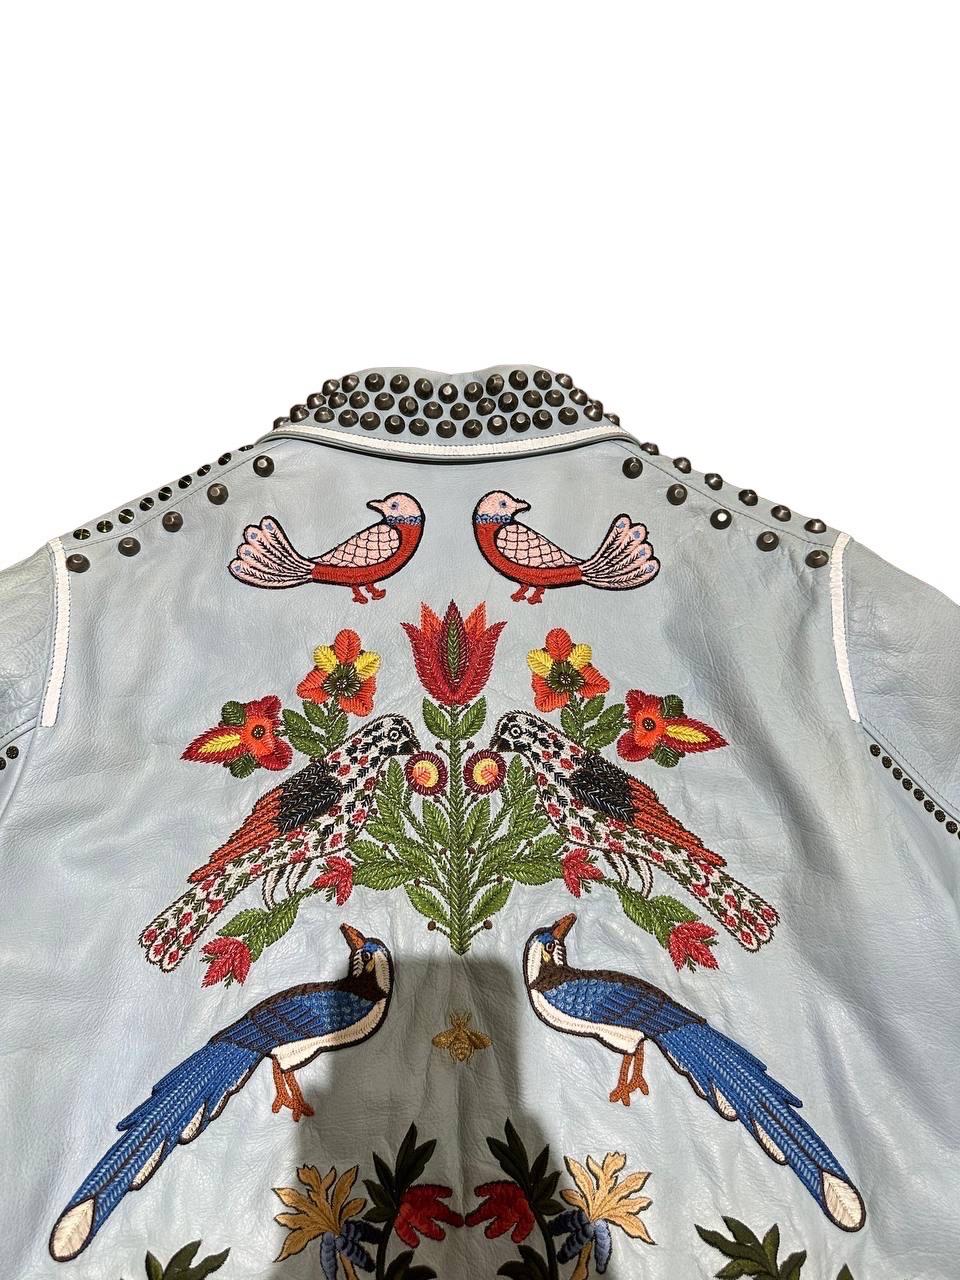 Gucci Leather Jacket Light Blue Floreal Embroidery For Sale 4